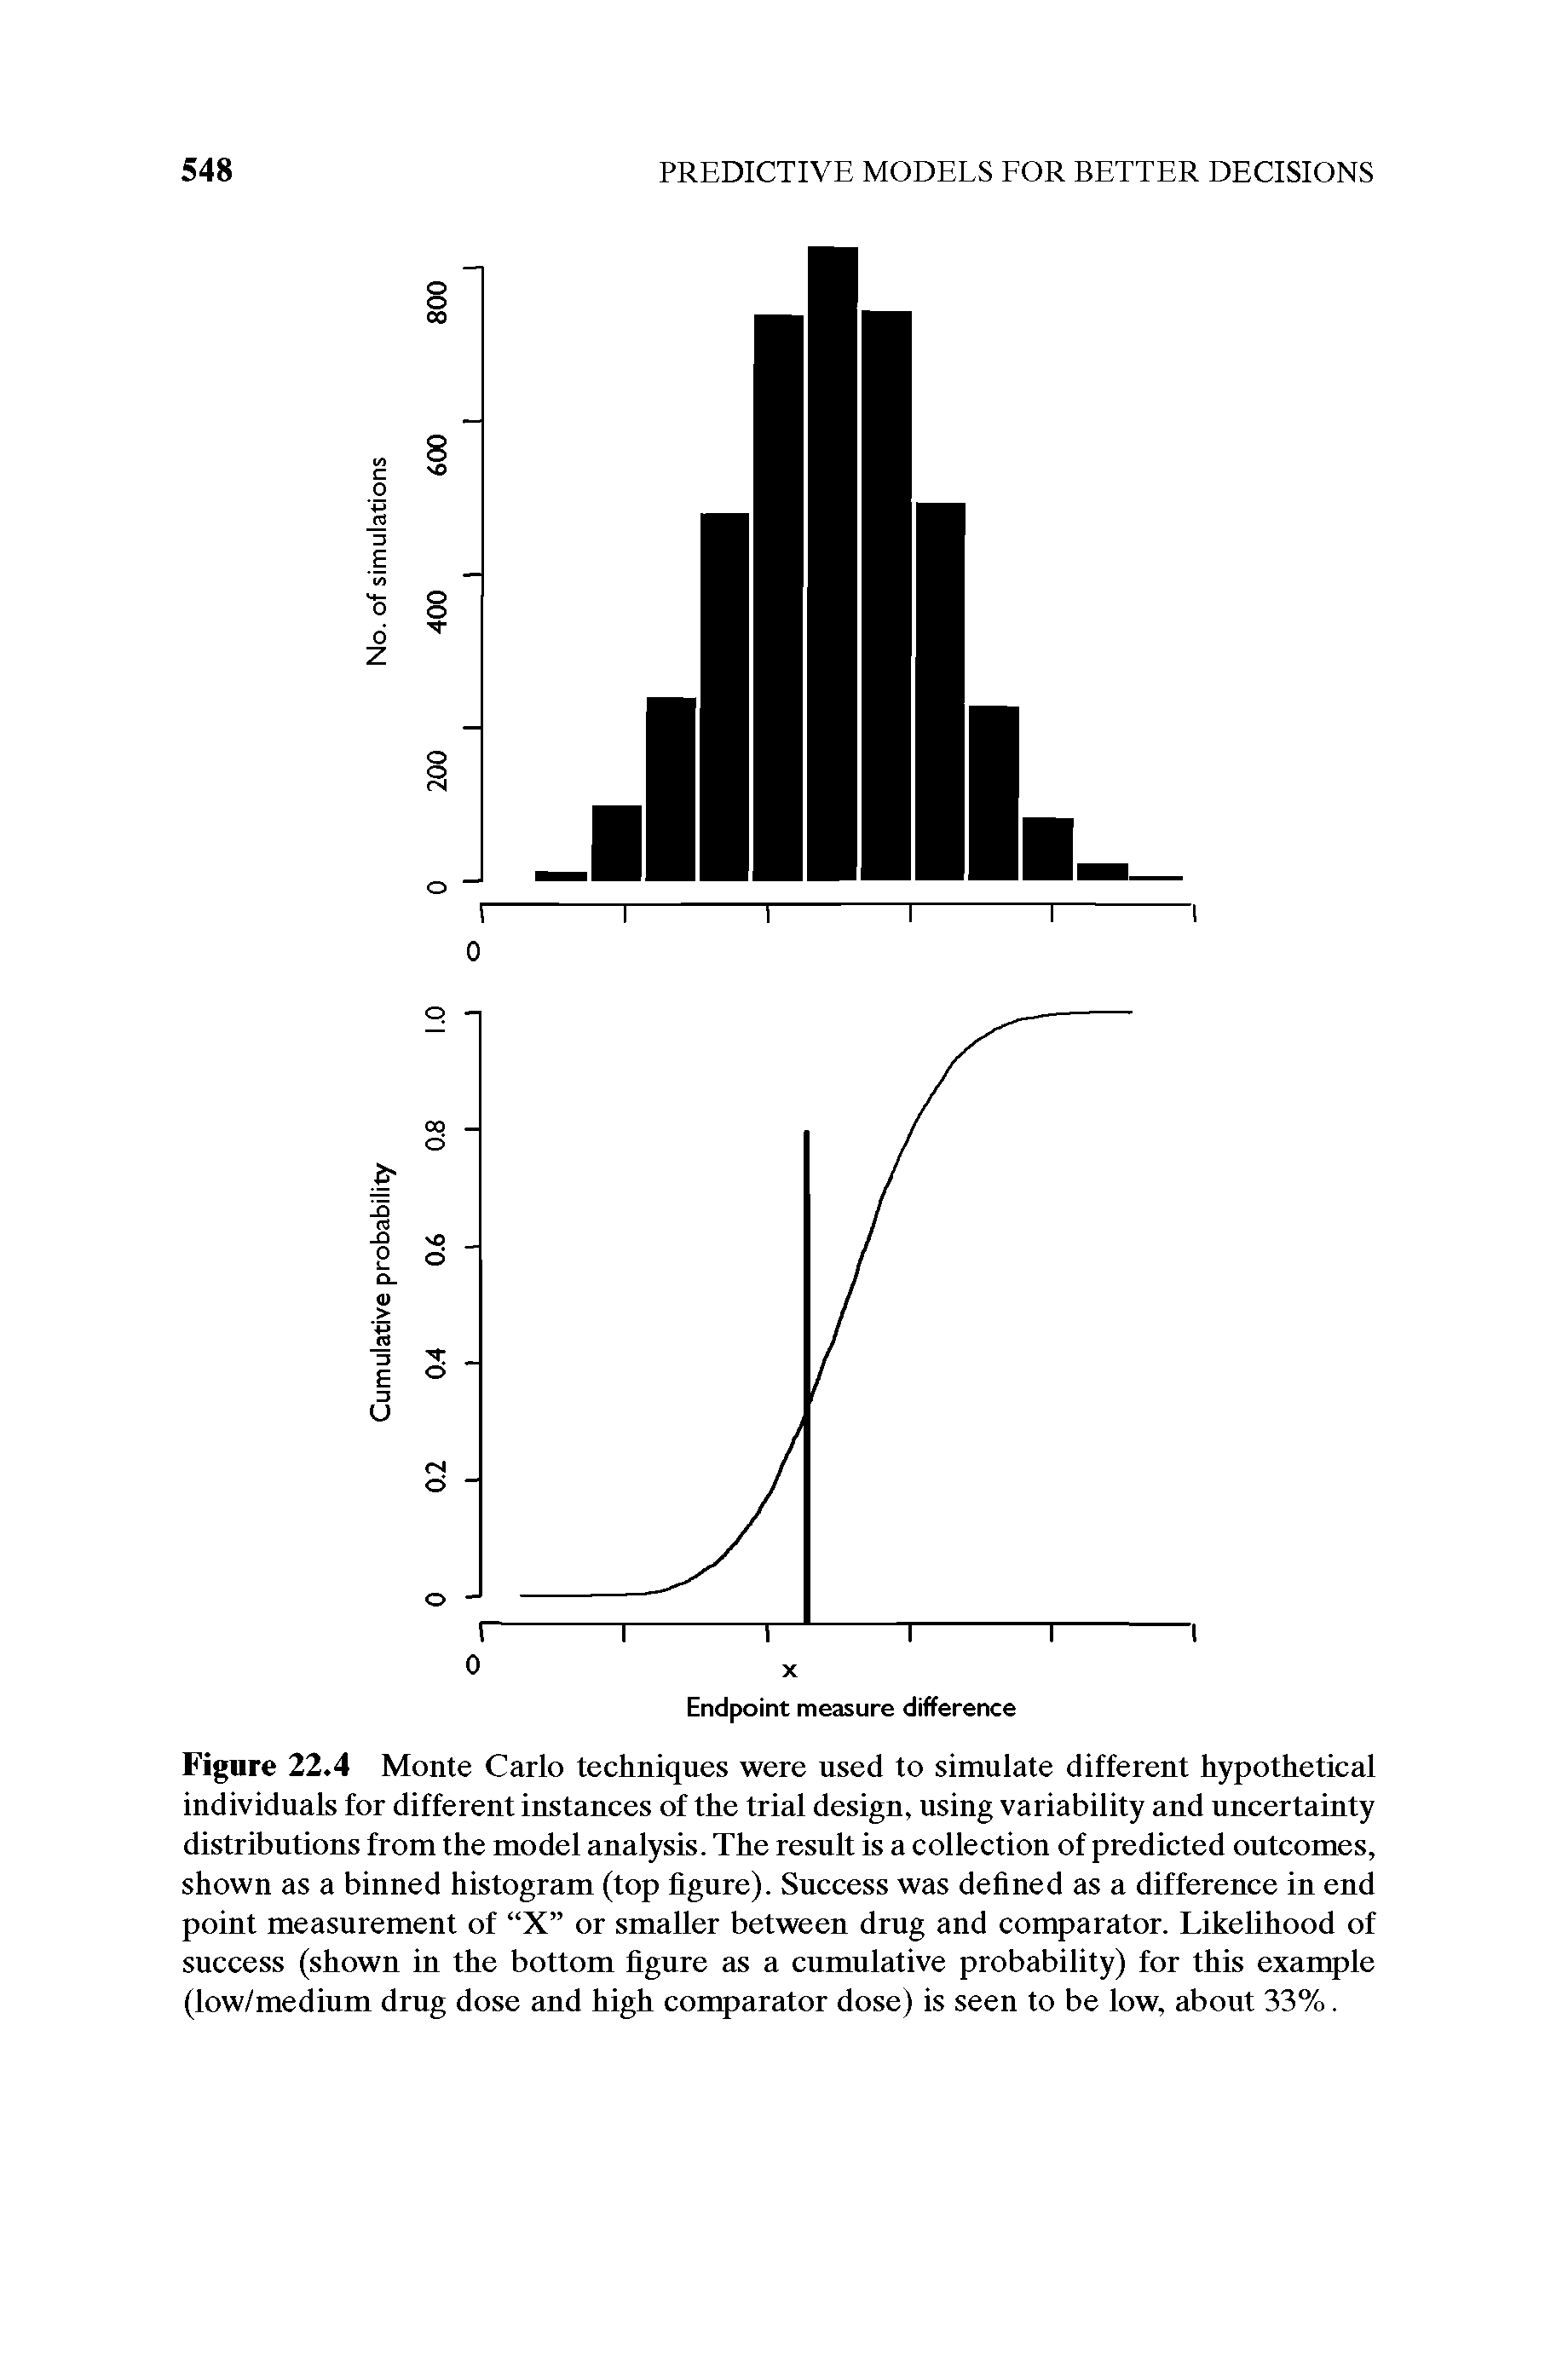 Figure 22.4 Monte Carlo techniques were used to simulate different hypothetical individuals for different instances of the trial design, using variability and uncertainty distributions from the model analysis. The result is a collection of predicted outcomes, shown as a binned histogram (top figure). Success was defined as a difference in end point measurement of X or smaller between drug and comparator. Likelihood of success (shown in the bottom figure as a cumulative probability) for this example (low/medium drug dose and high comparator dose) is seen to be low, about 33%.